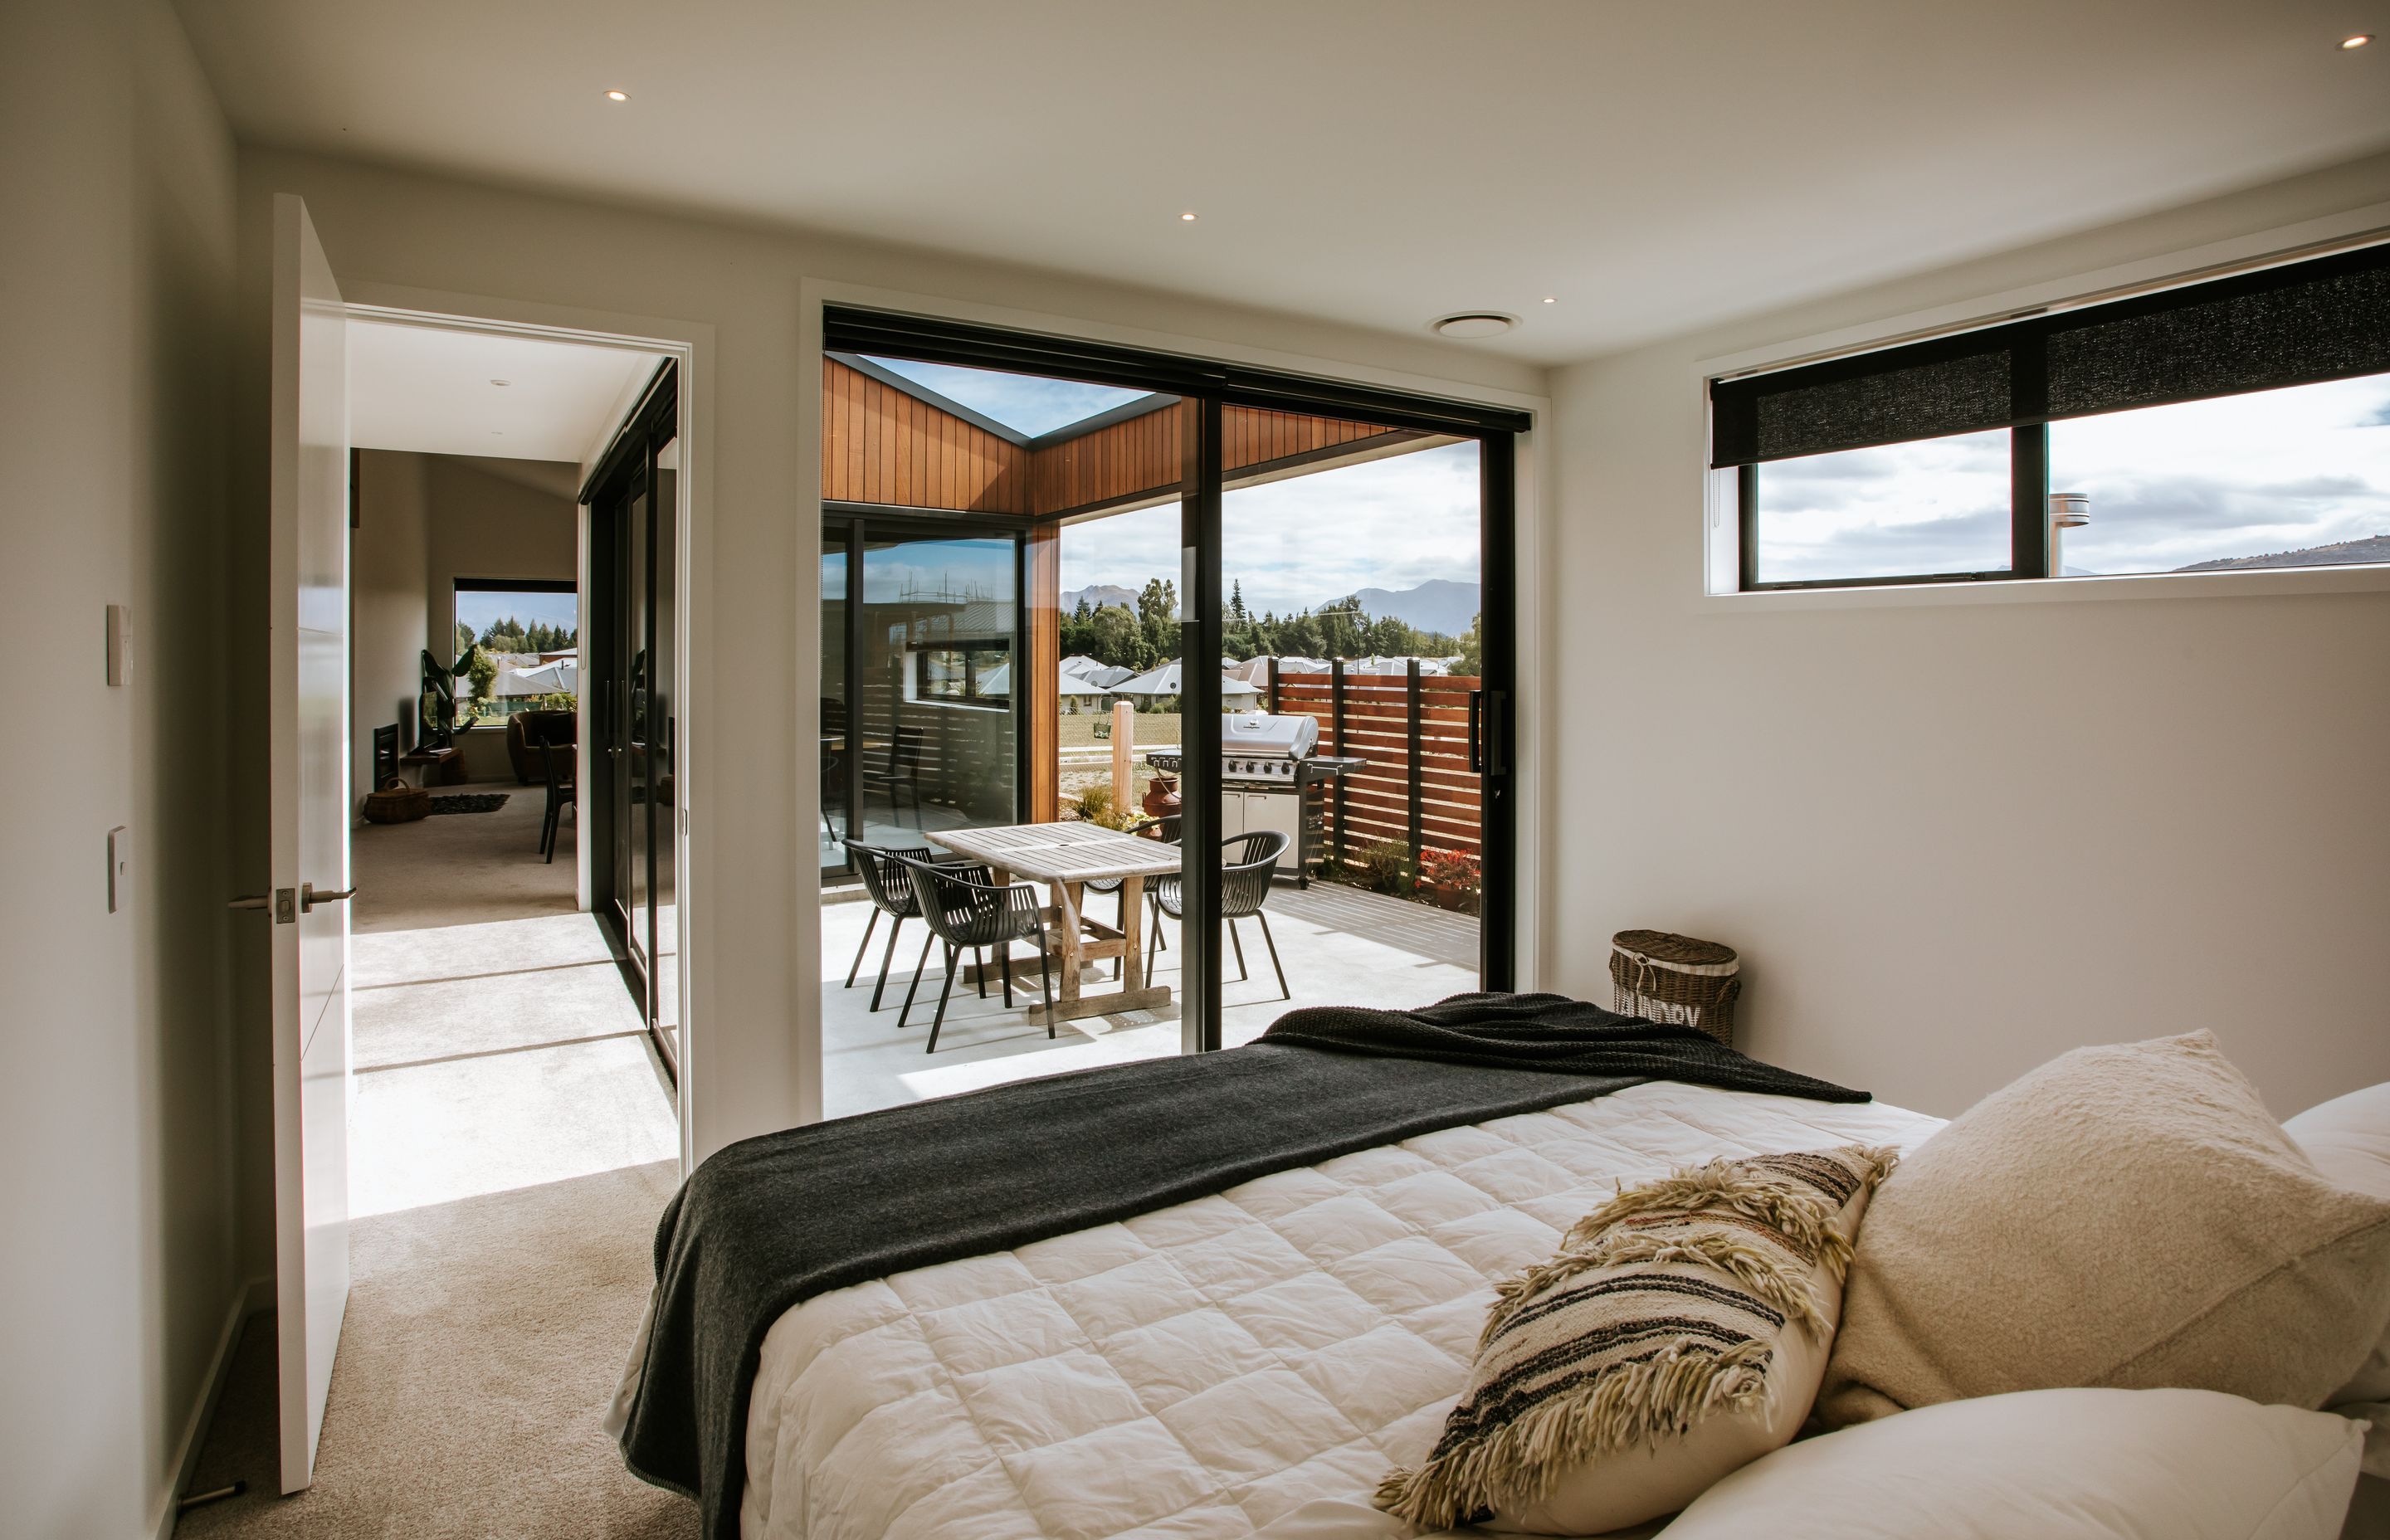 A cosy and comfortable bedroom looks out onto the external courtyard.